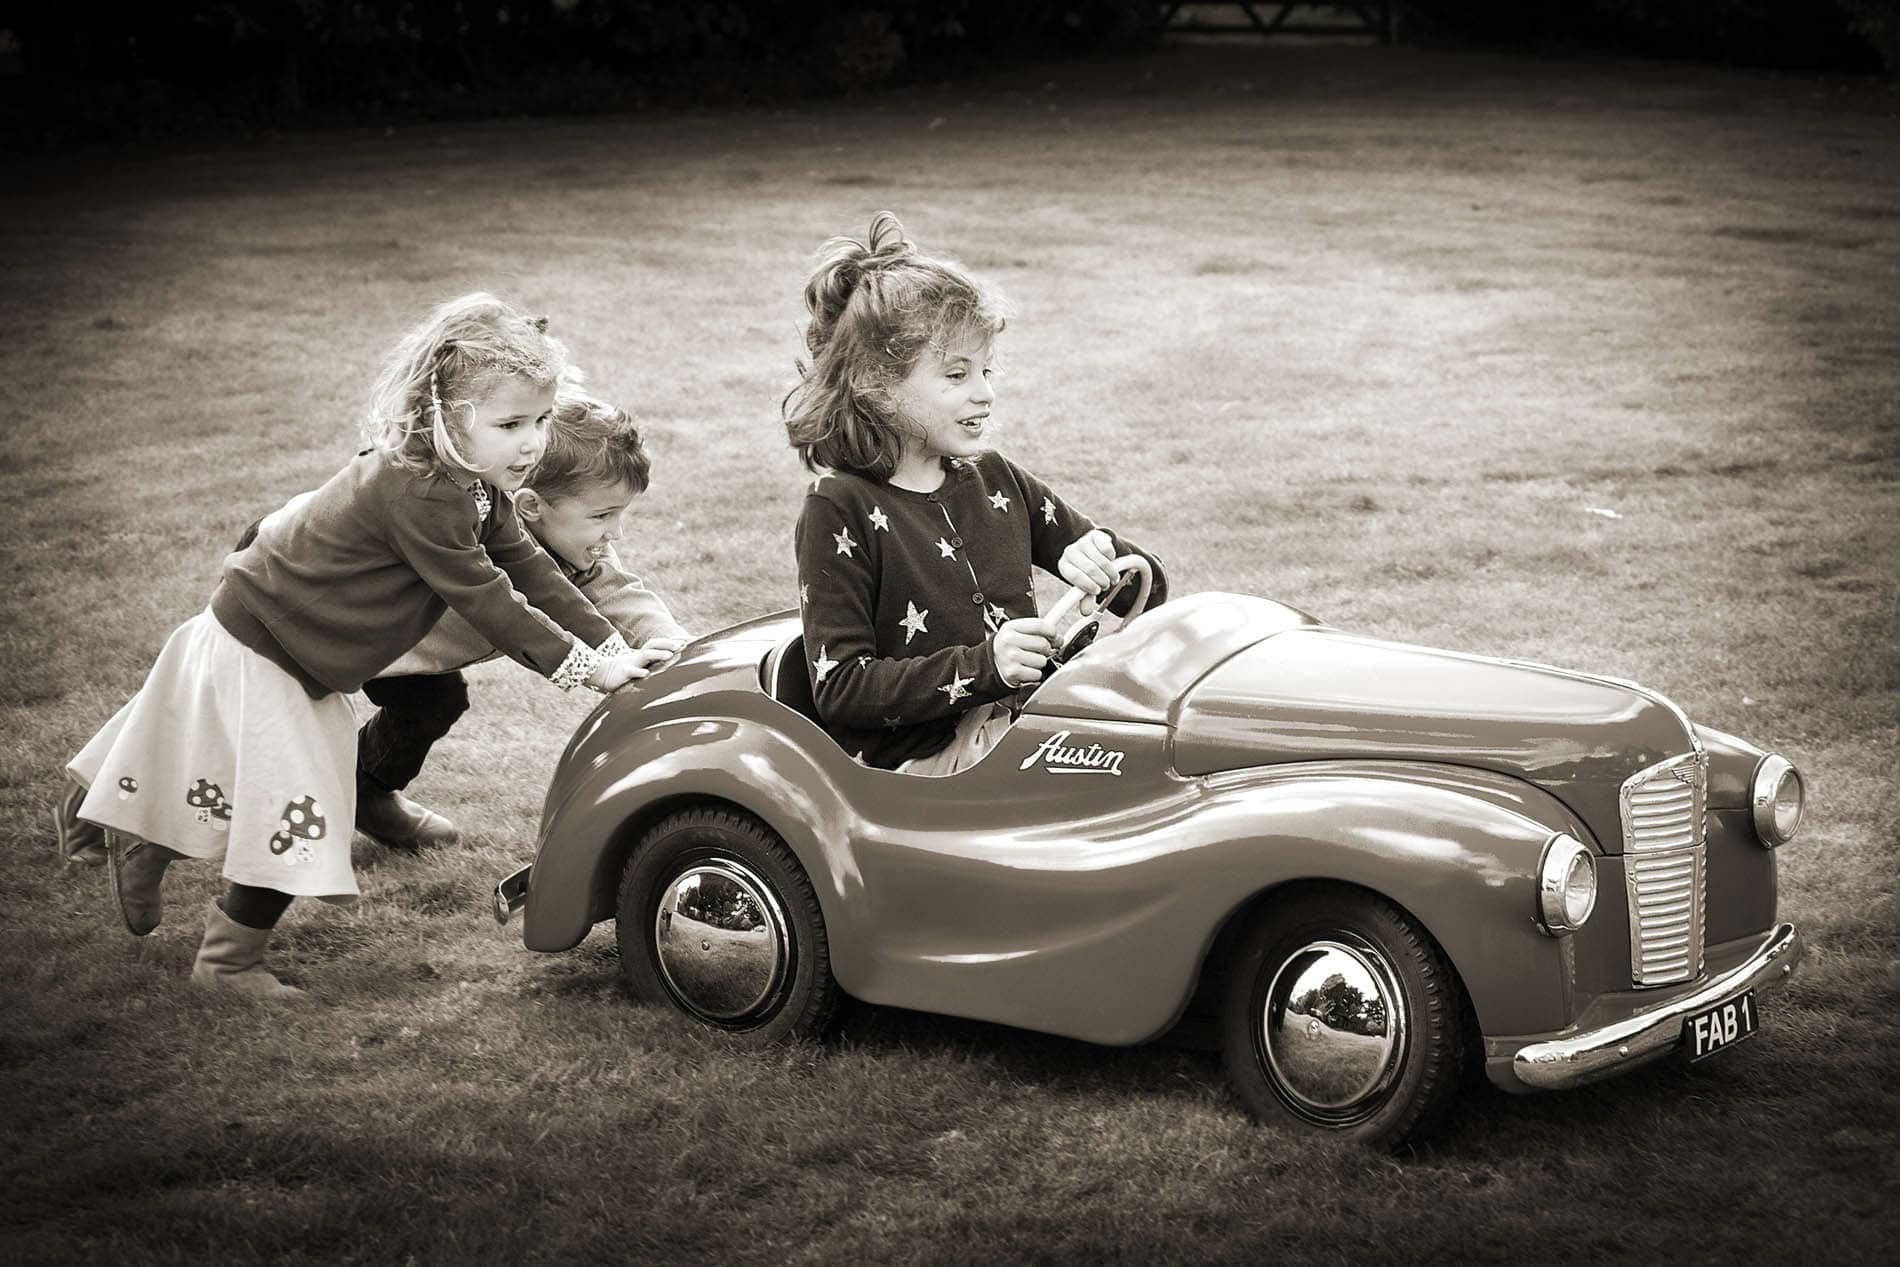 photography of children - Cotswolds - Laurence Jones - children and toy car